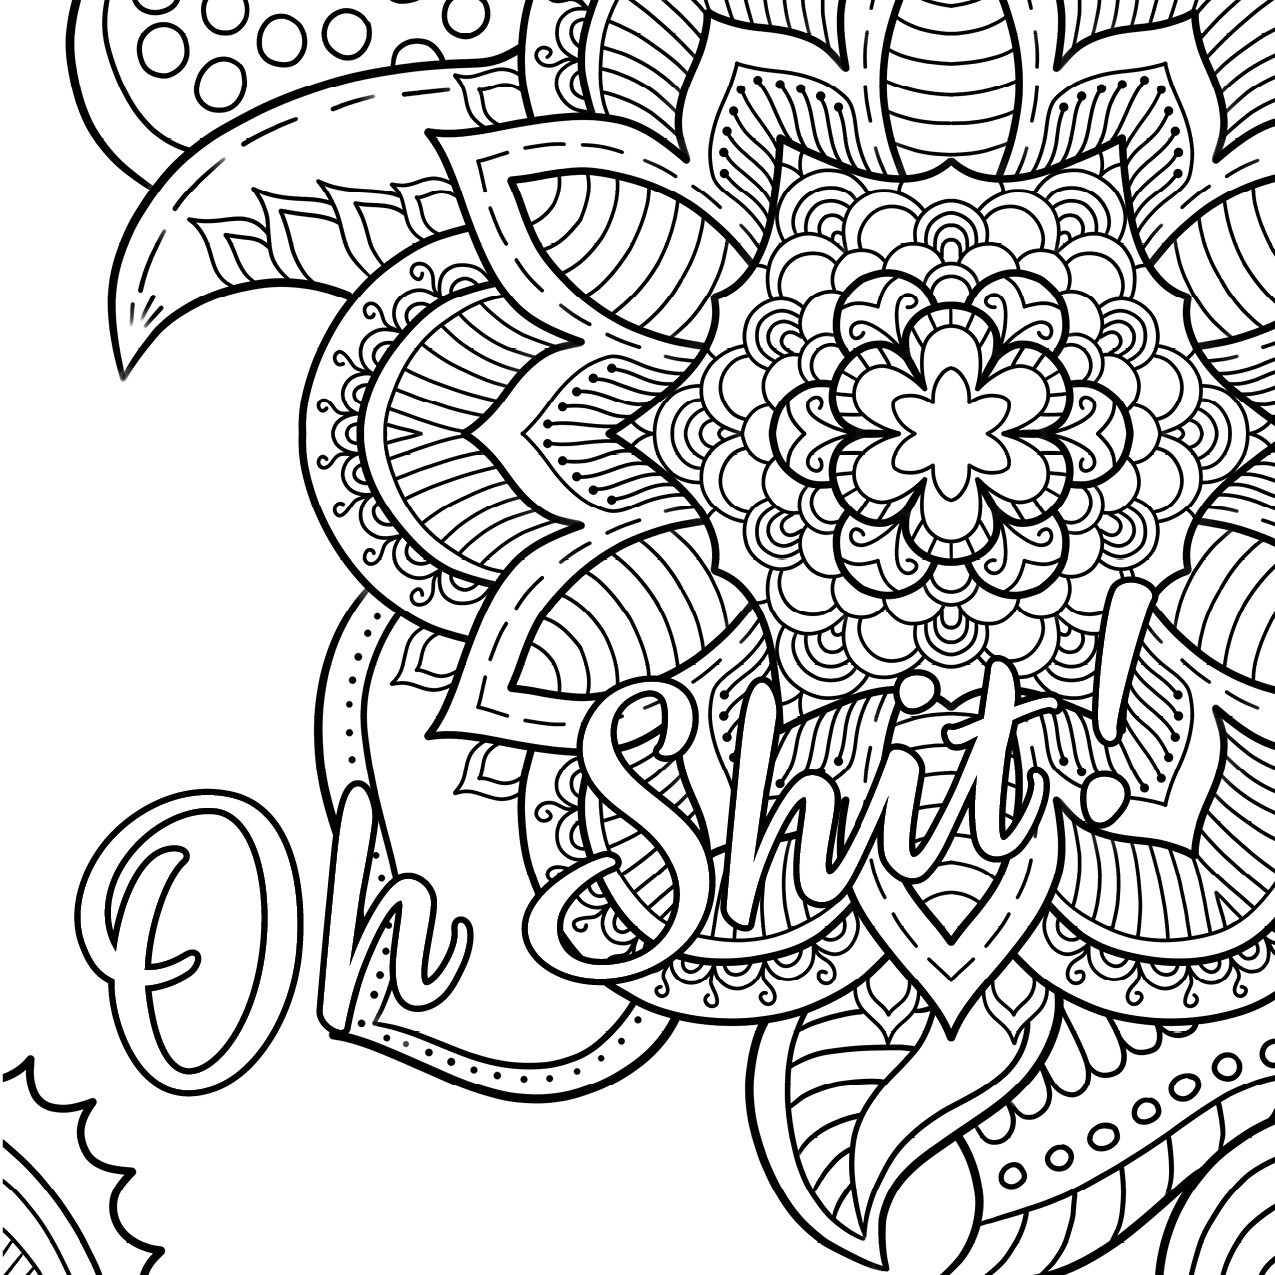 Adults Only Coloring Book
 Unique Free Printable Coloring Pages for Adults ly Swear